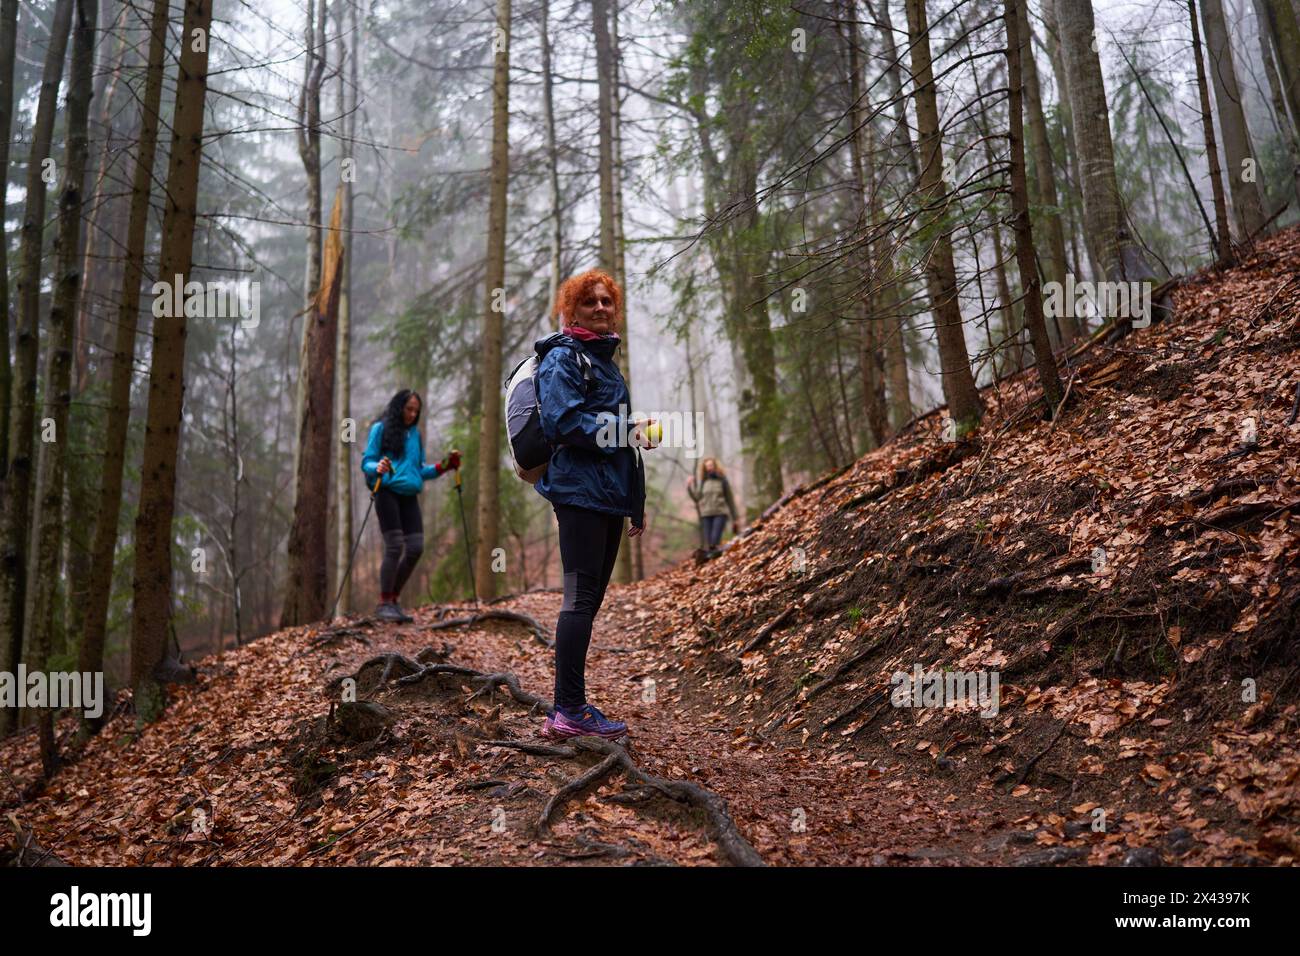 Women with backpacks hiking on a rainy day in the mountains Stock Photo